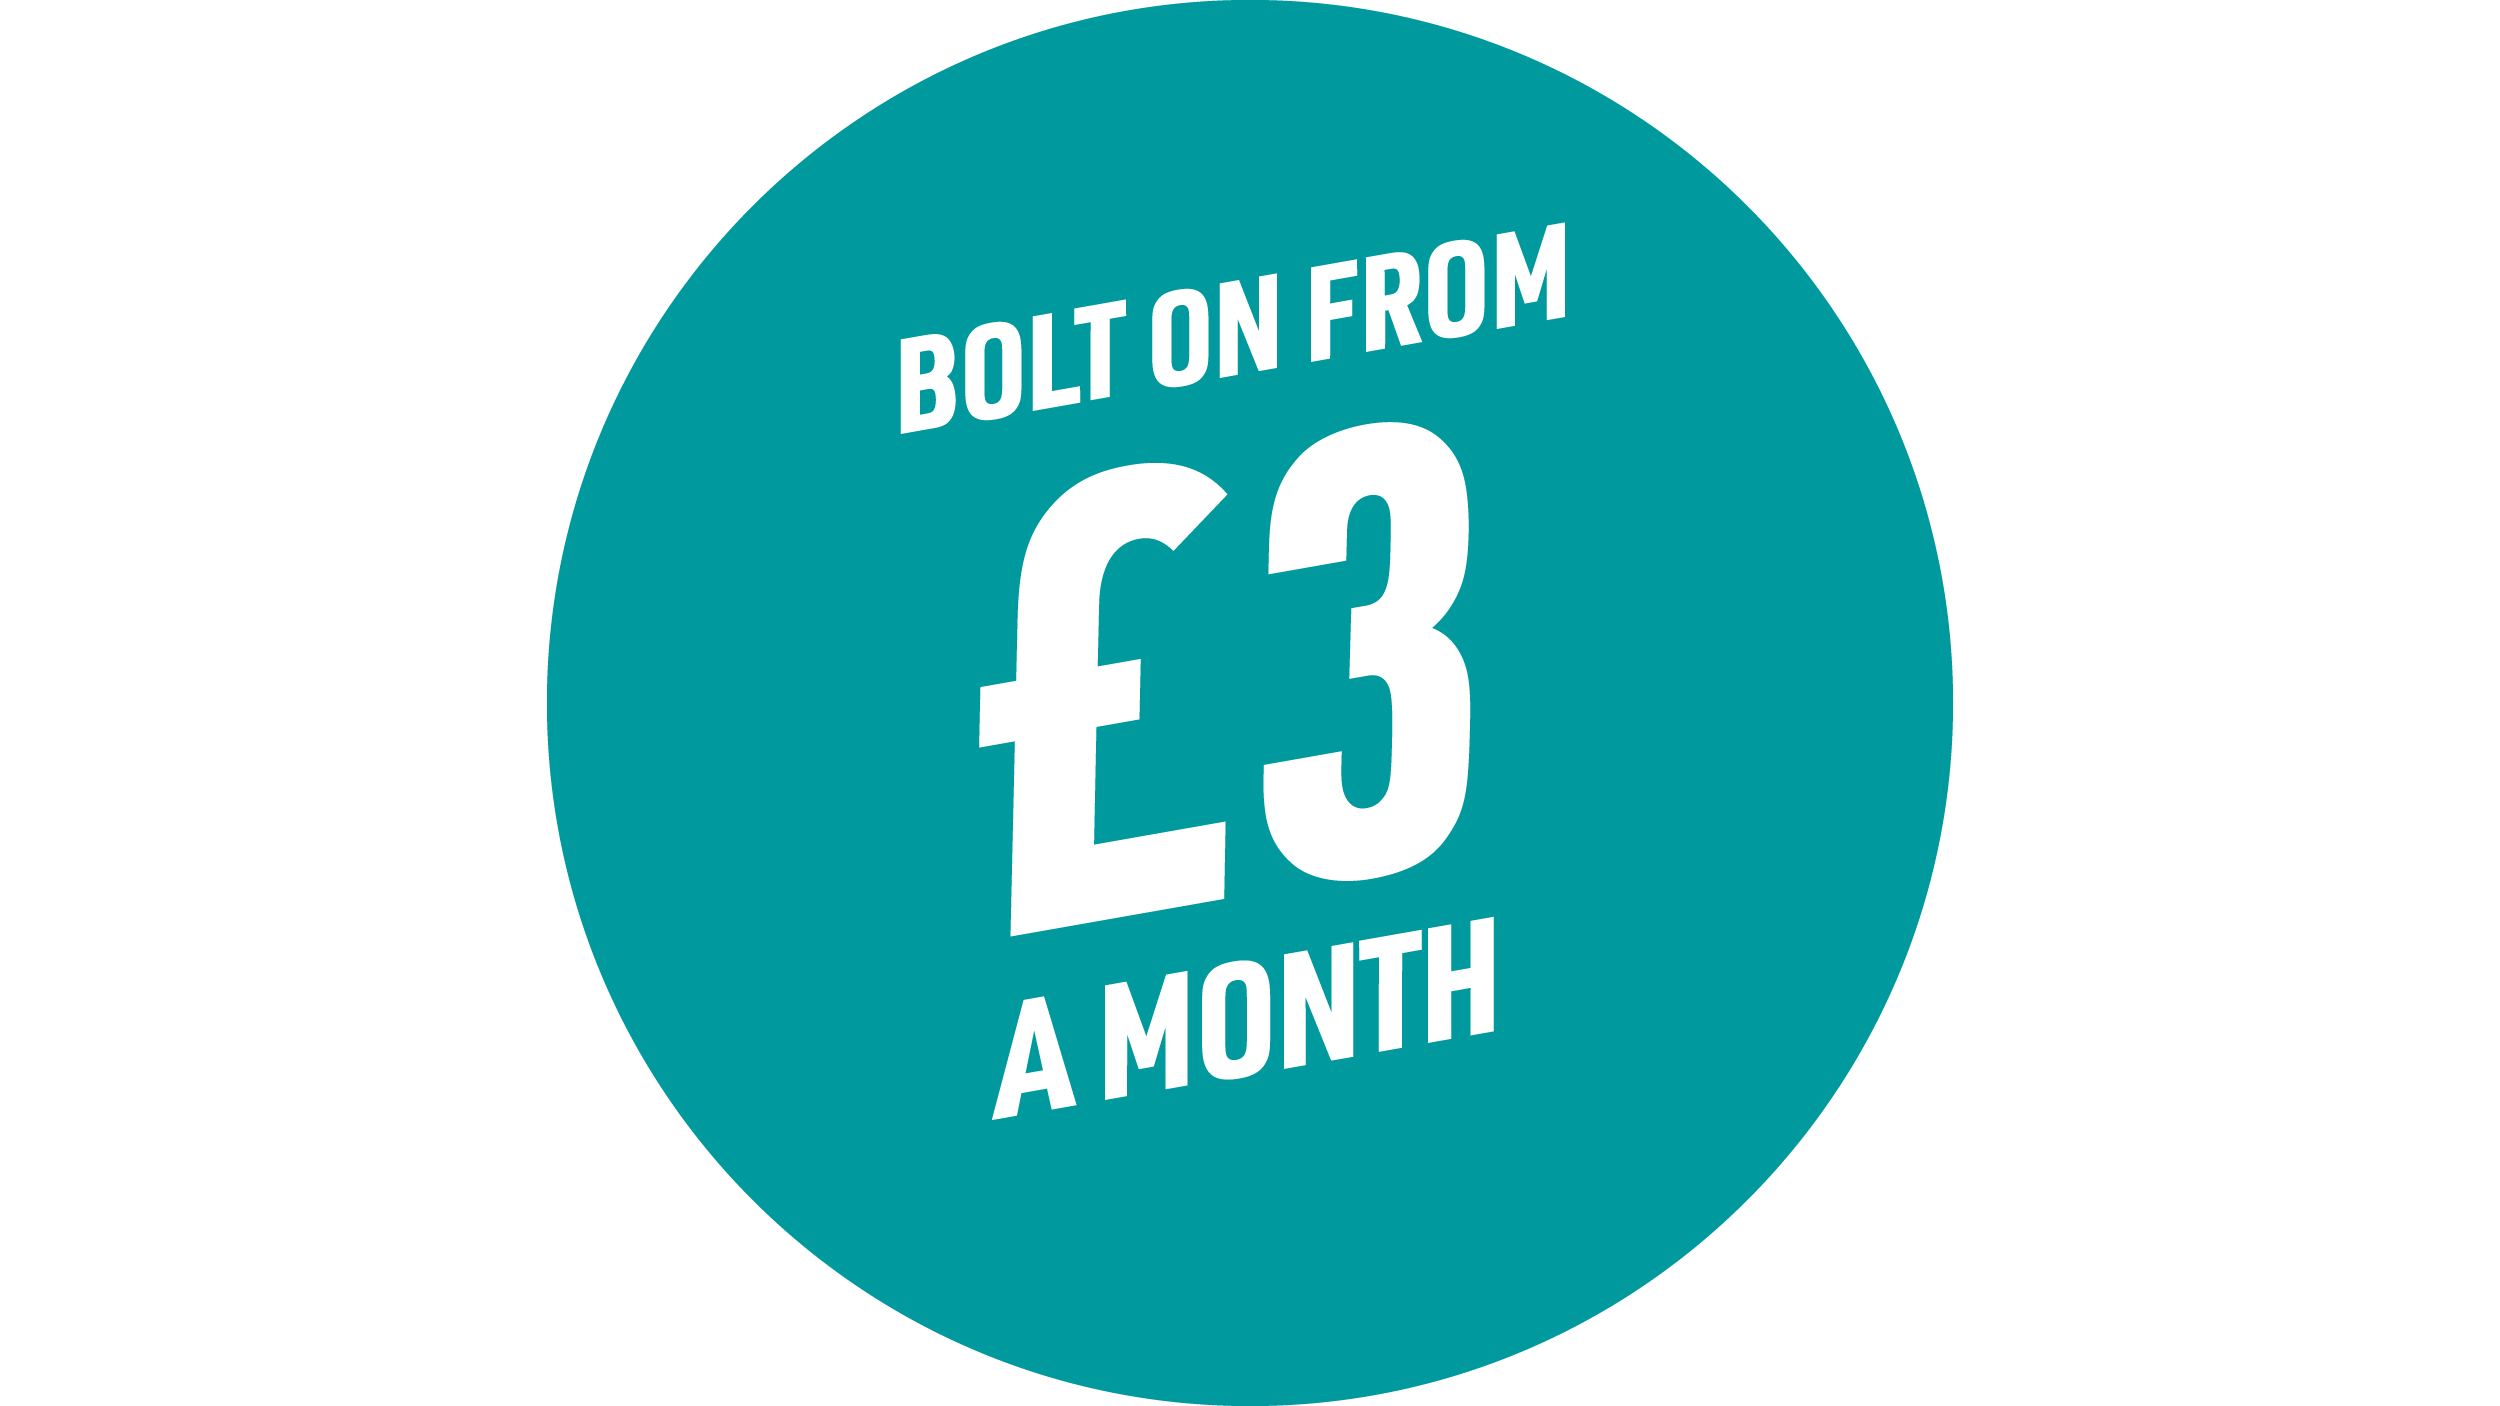 Bolt on from £3 a month